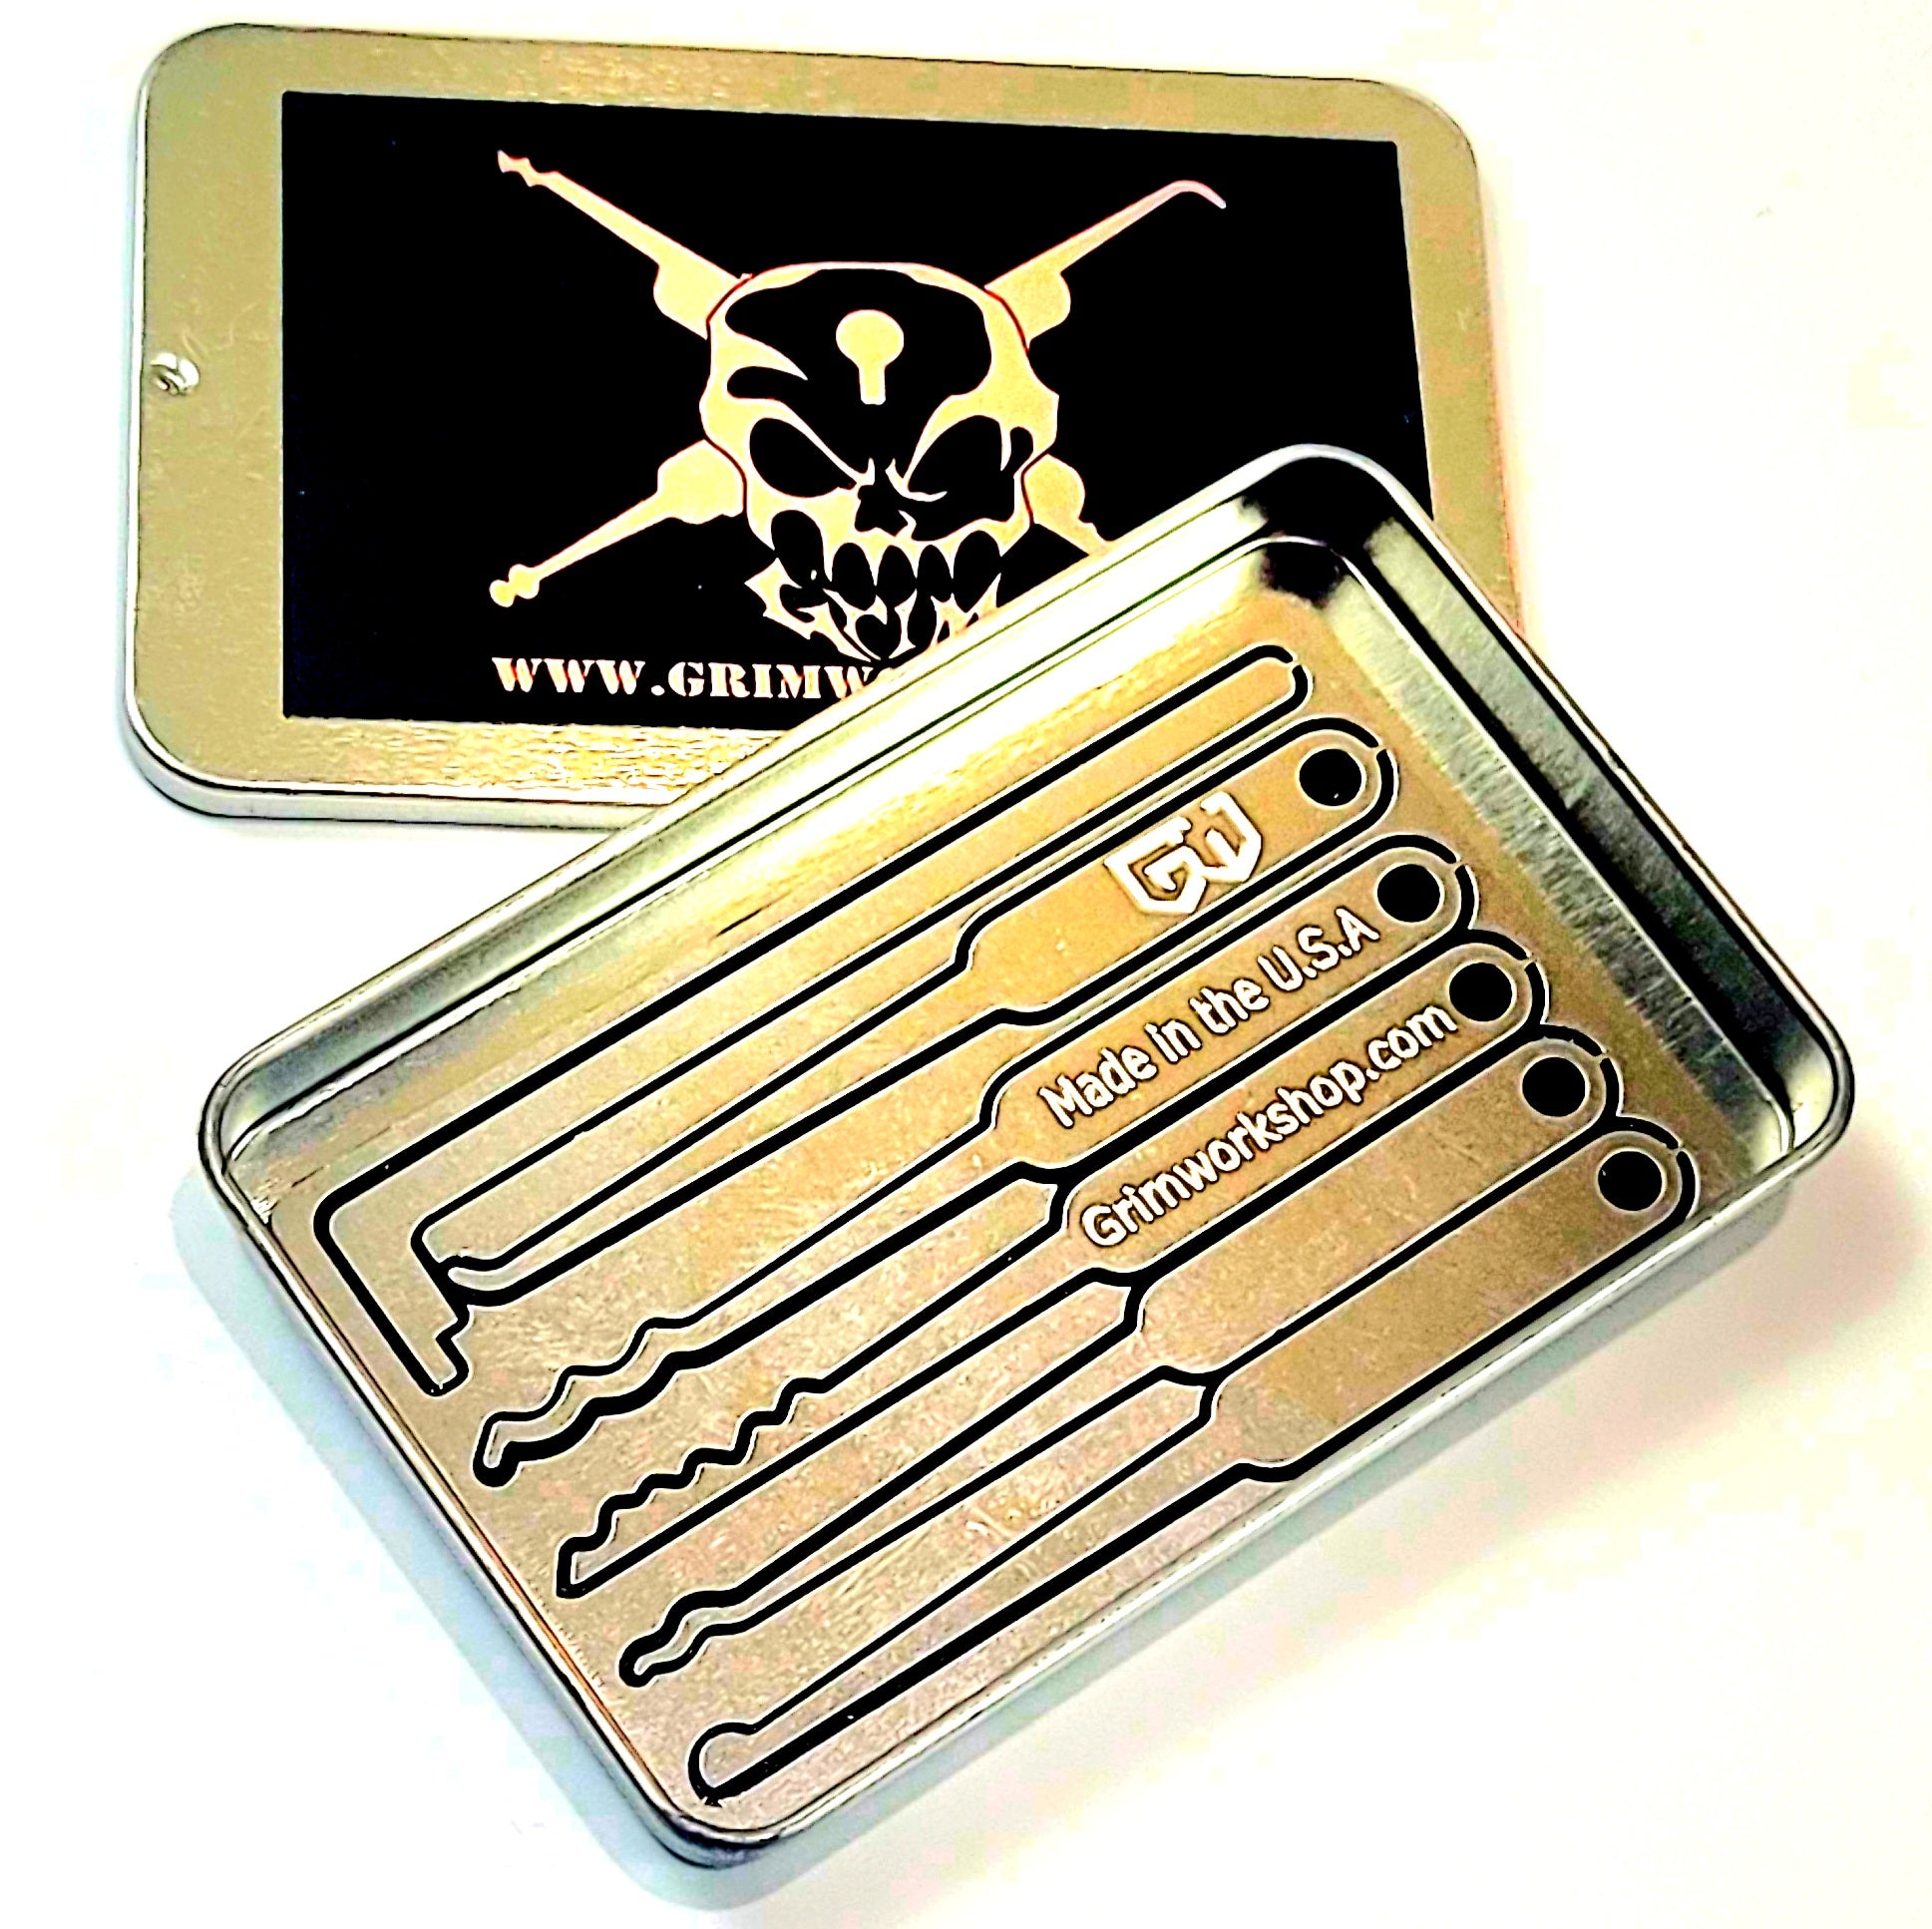 1 Wallet Size Lock Pick Set 5pcs tools with 10 in1 Multitool